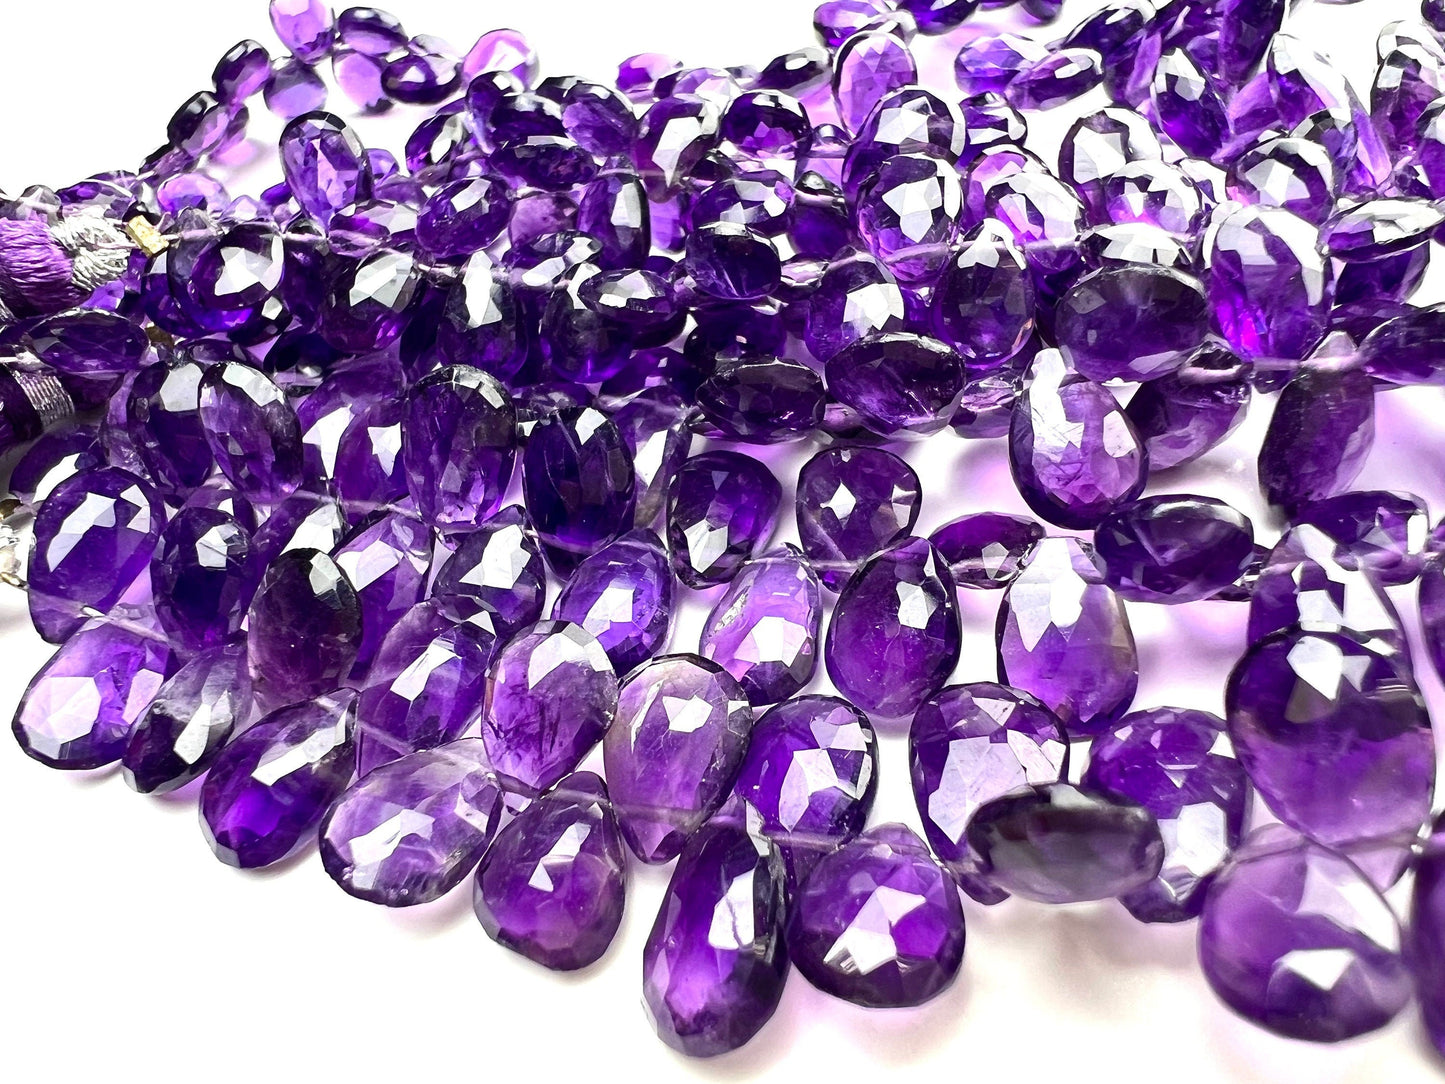 Natural Amethyst Faceted Drop 5x7-8mm and 6x8-9.5mm Pear Drop AAA quality, for Jewelry Making DIY Gemstone Beads. 10, 20, 30 pcs